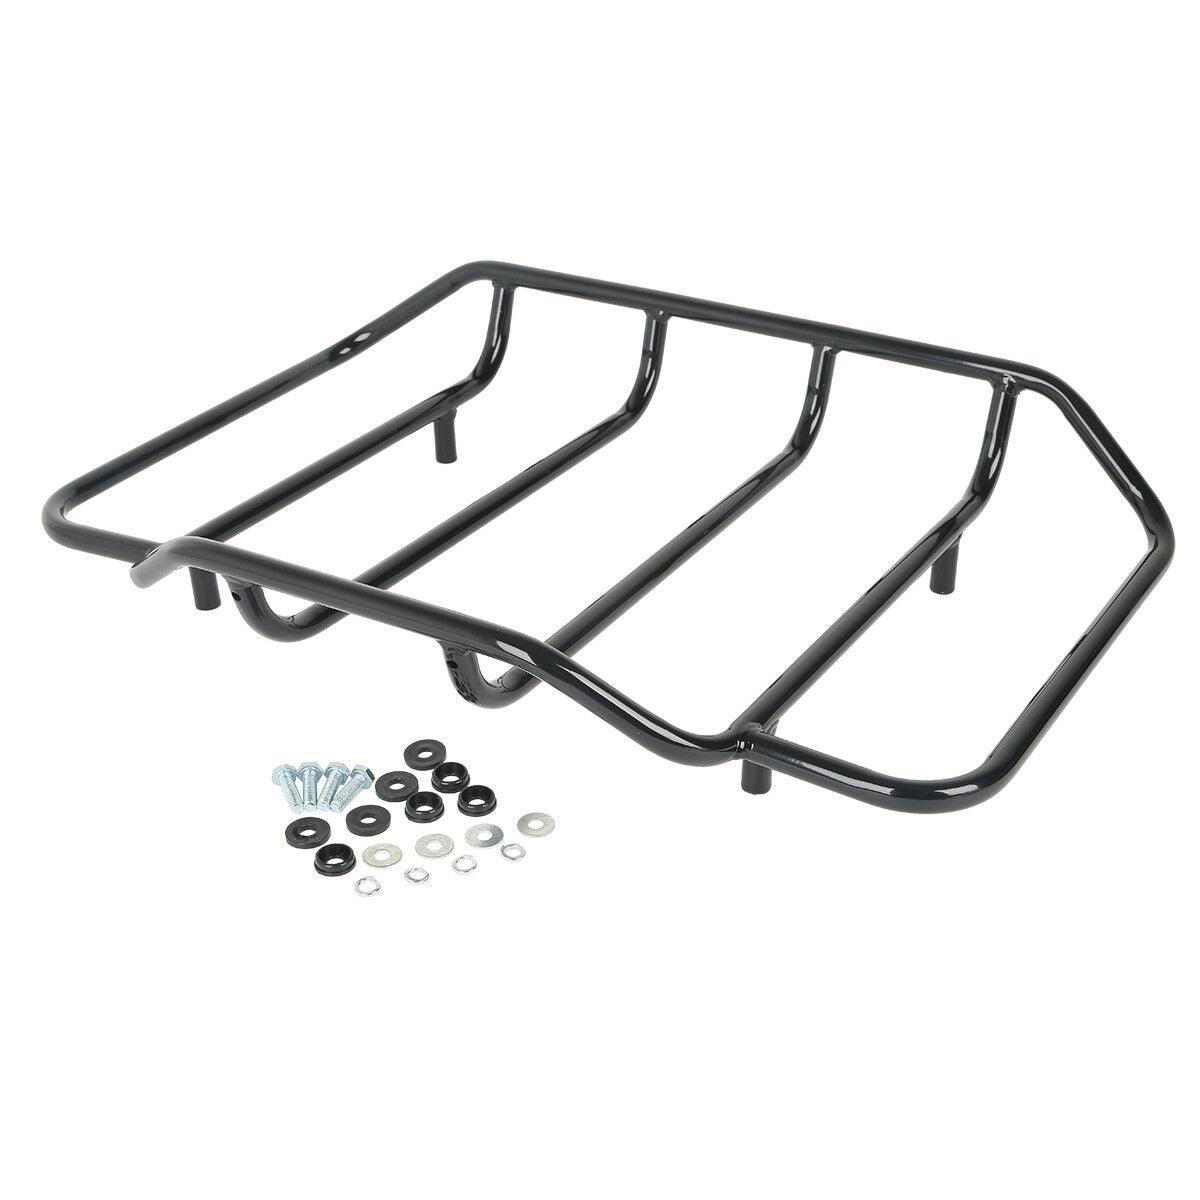 Black King Pack Trunk Mount Rack Fit For Harley Tour Pak Street Glide 1997-2008 - Moto Life Products